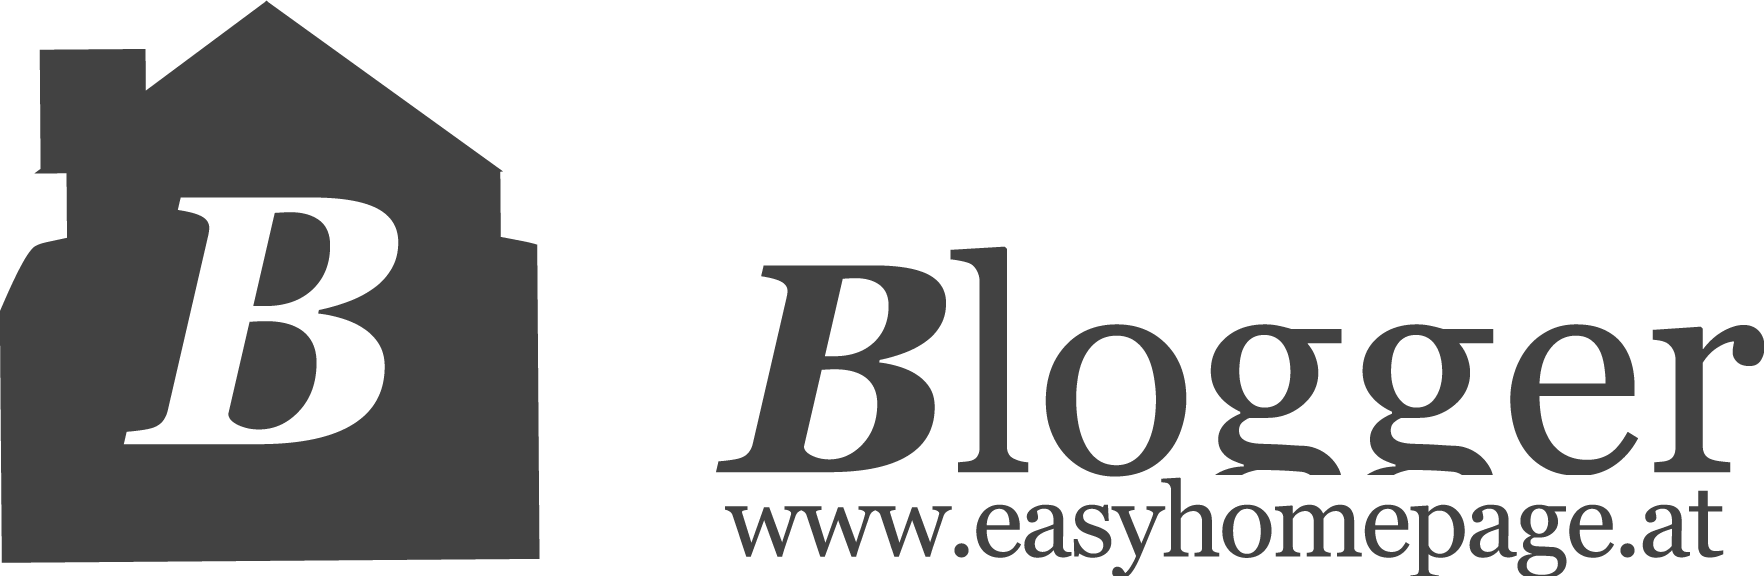 Blogger | easyhomepage.at